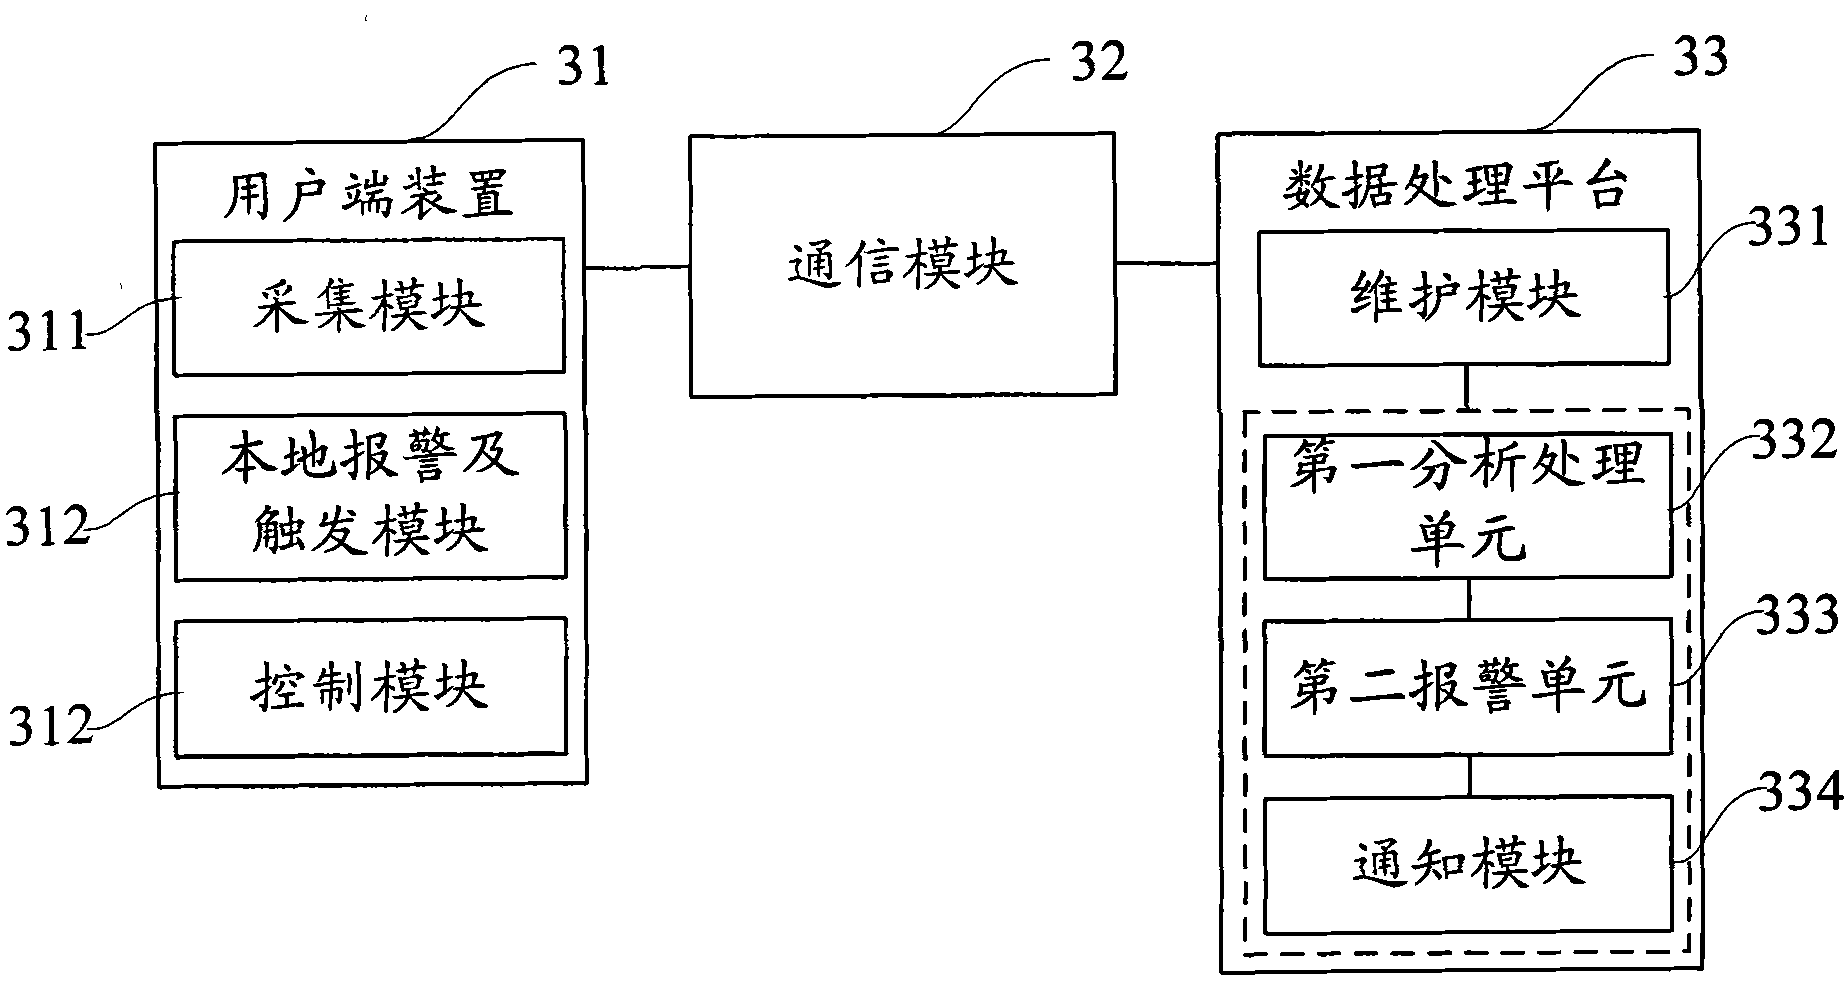 Physiological data monitoring system and method